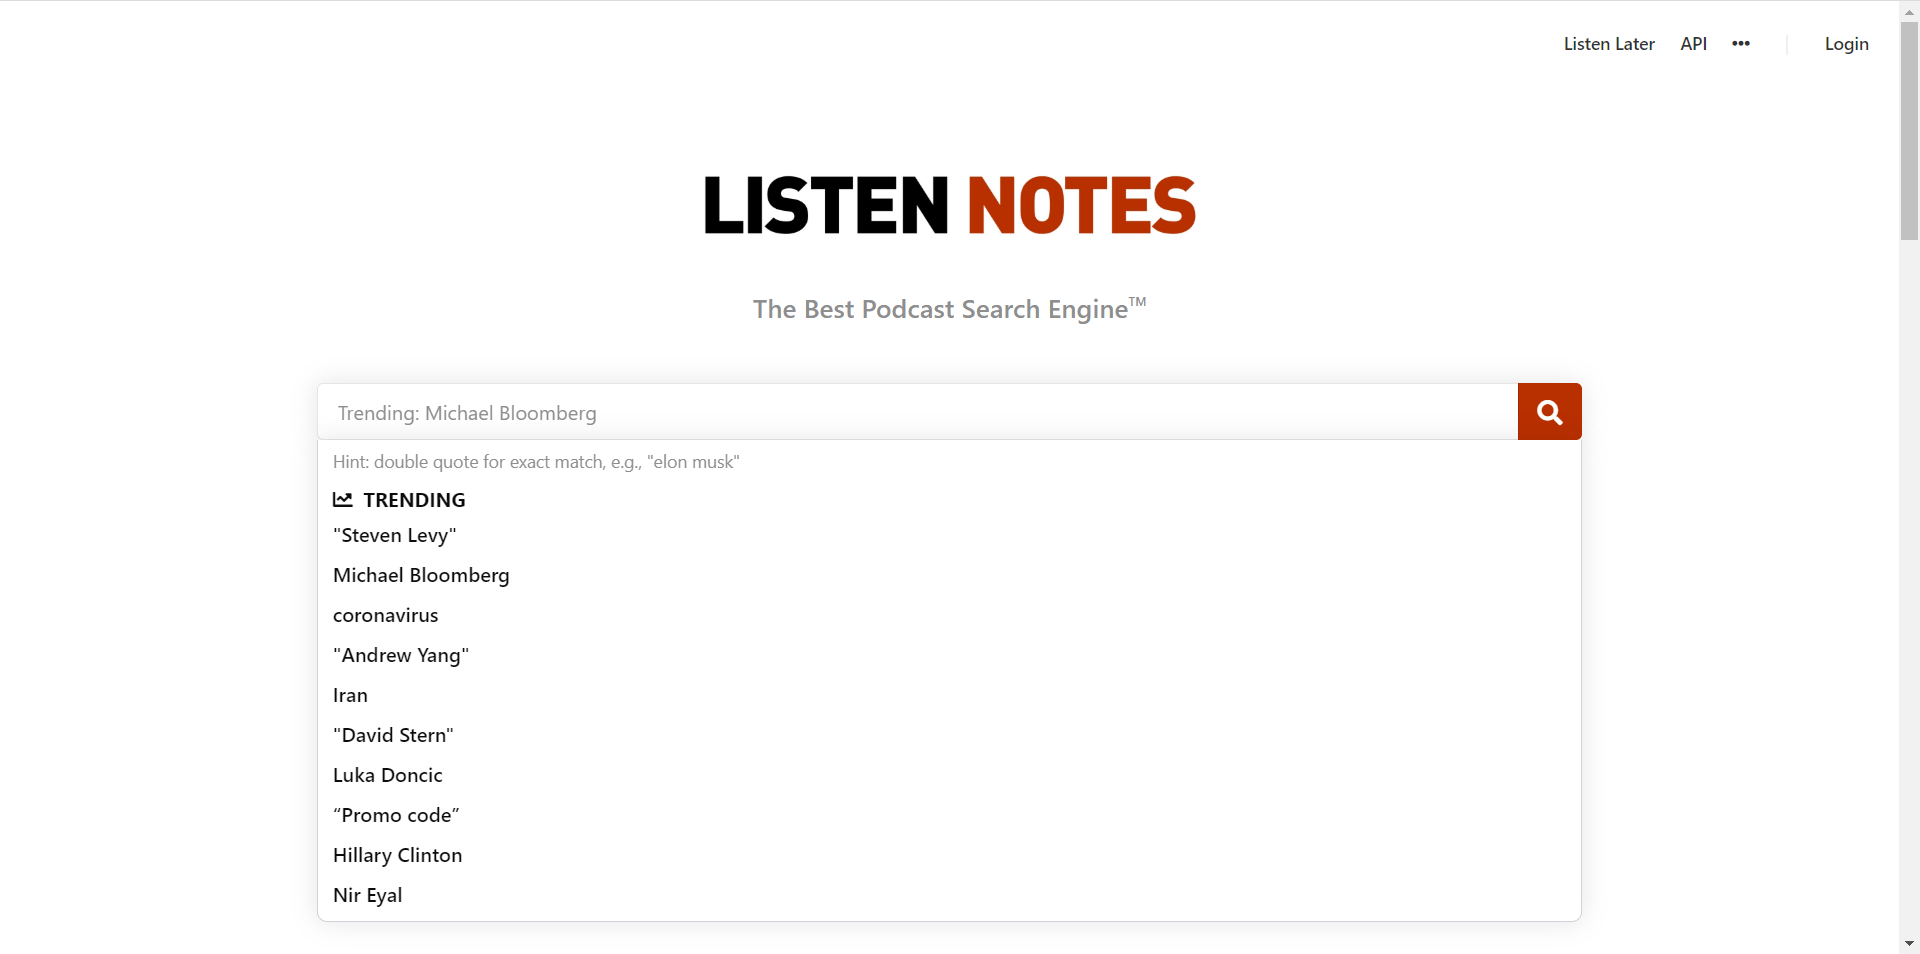 Listen Notes the Podcast Search Engine